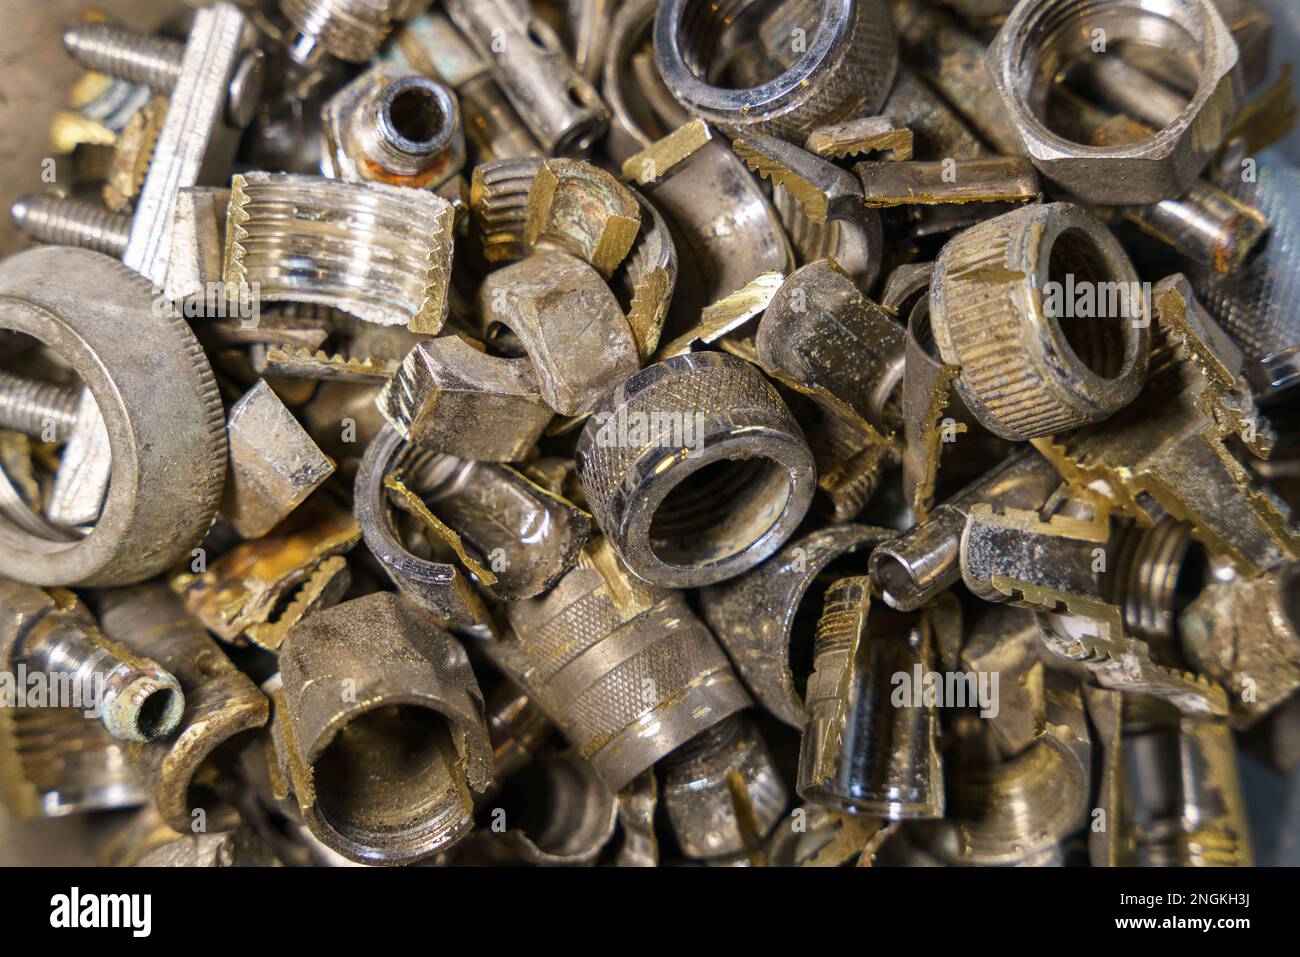 Scrap Brass Nuts and Fittings Ready To Be Recycled Stock Photo